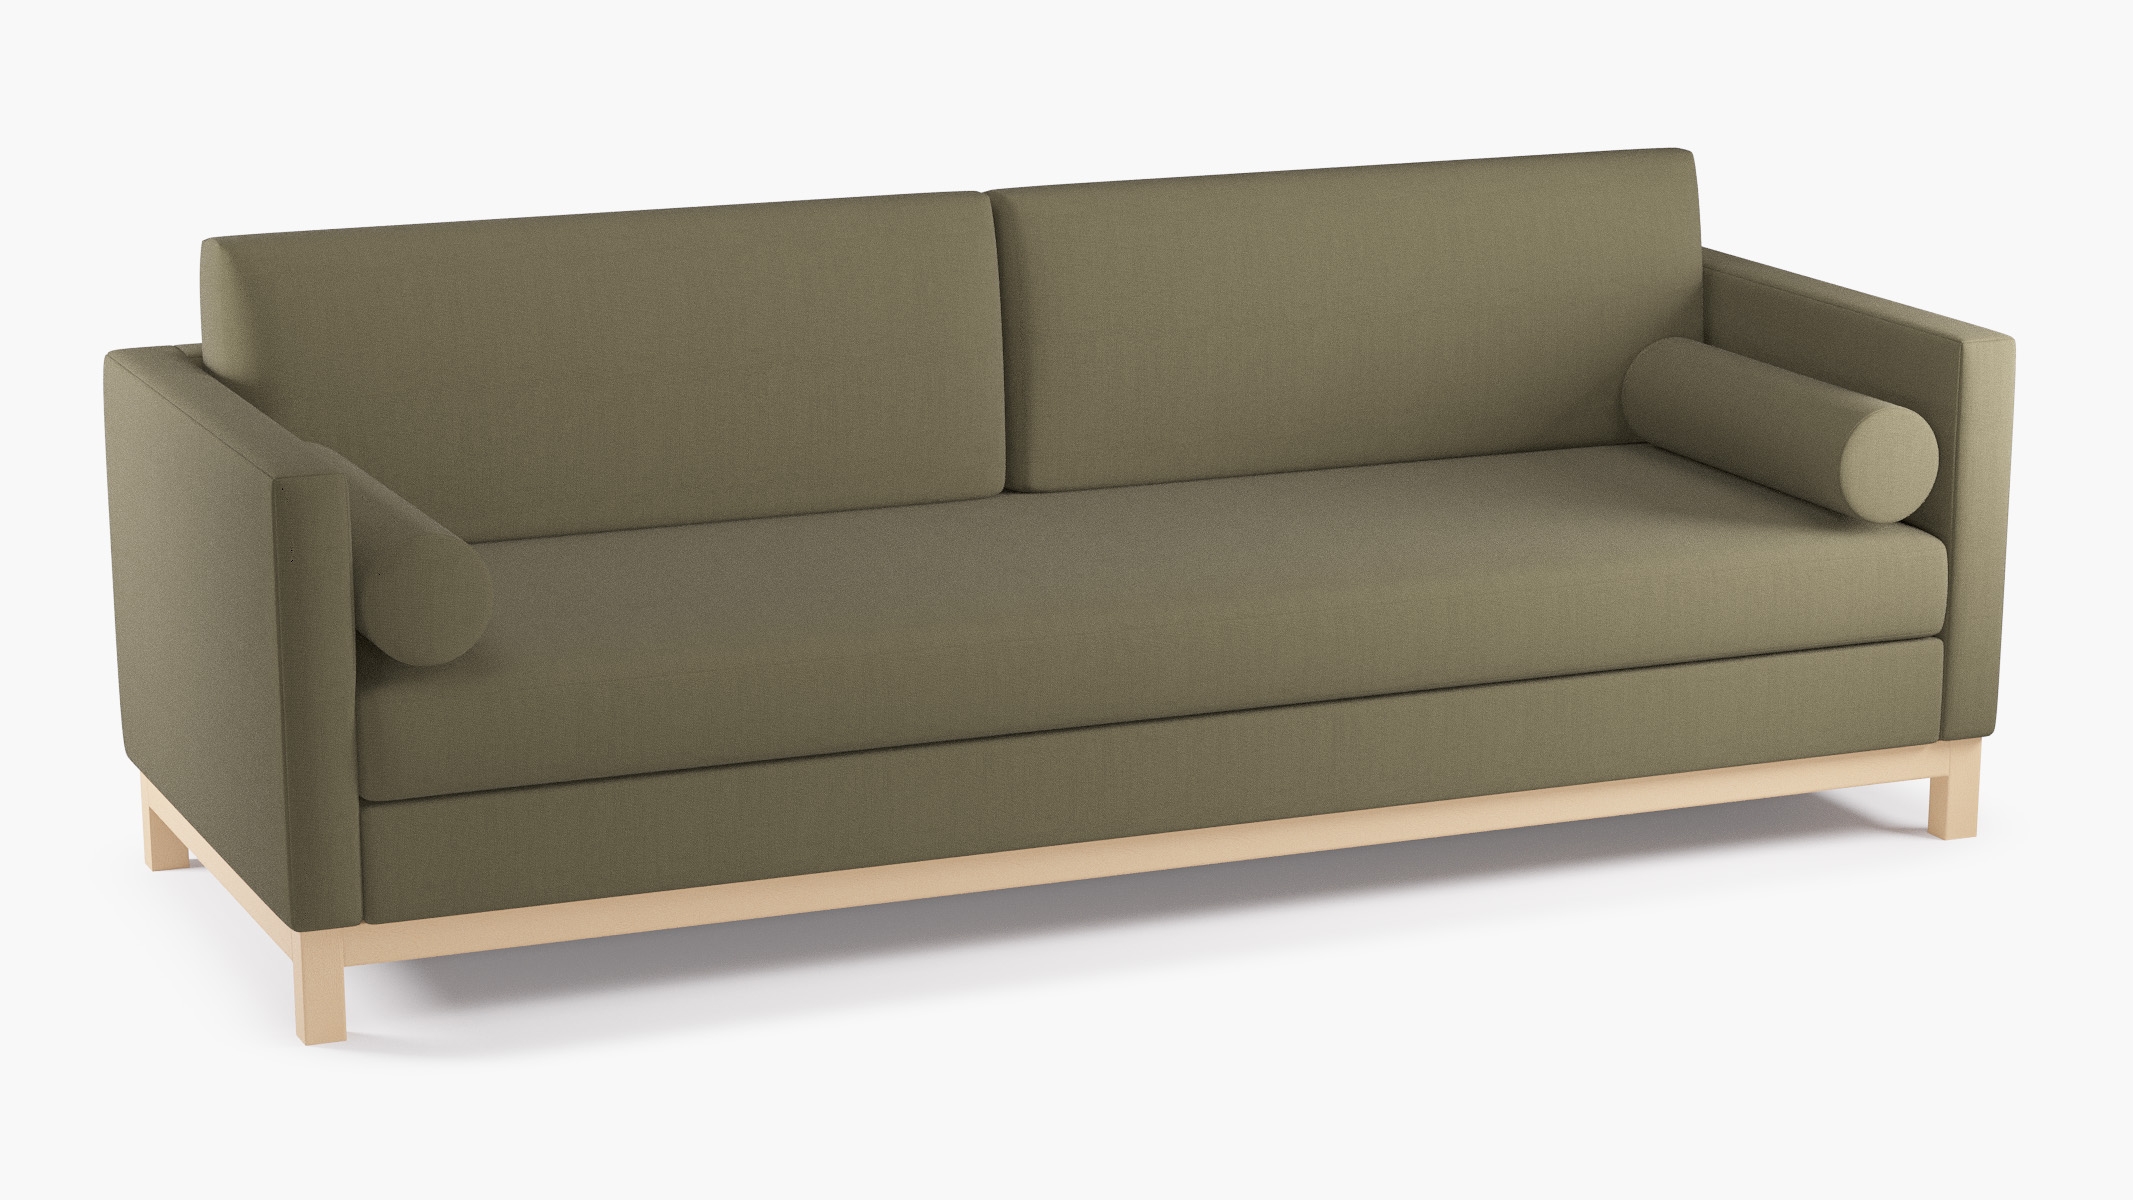 Tailored Tuxedo Sofa, Olive Everyday Linen, Natural - Image 1